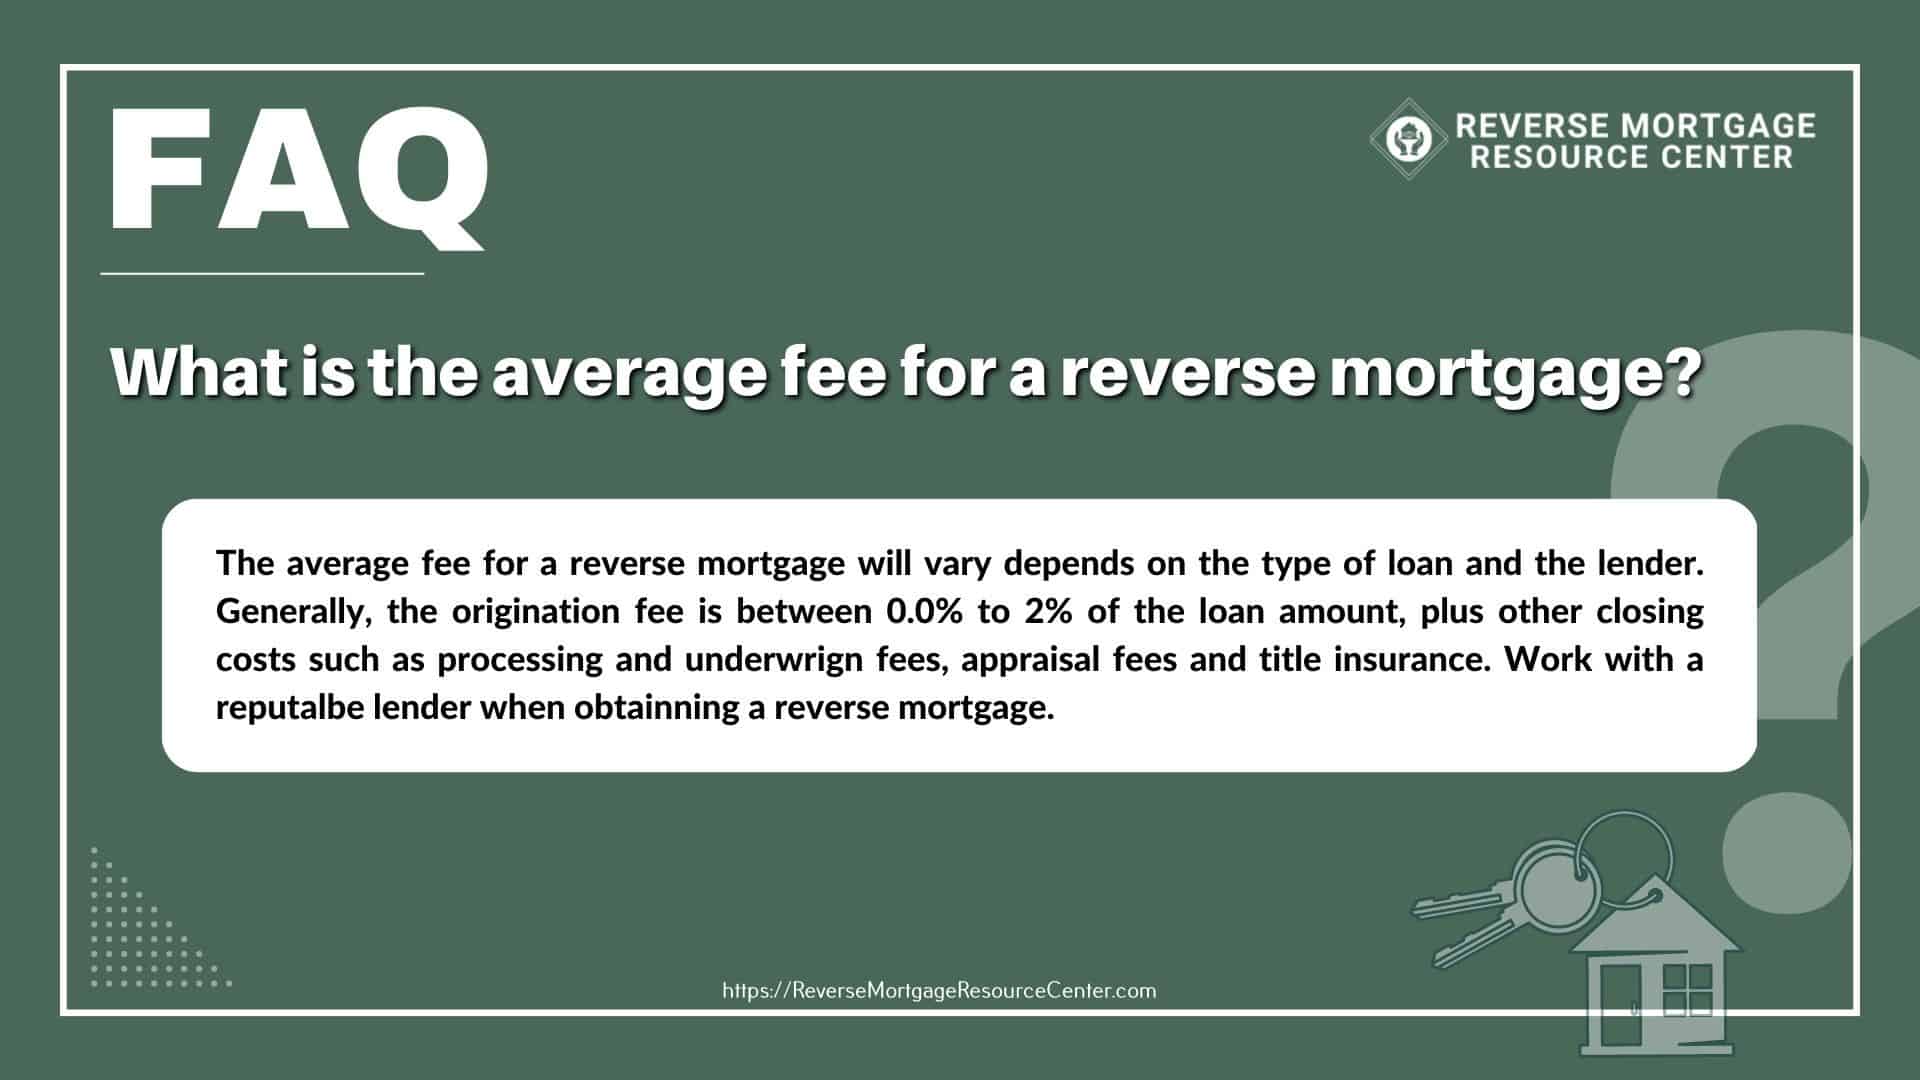 What is the average fee for a reverse mortgage?